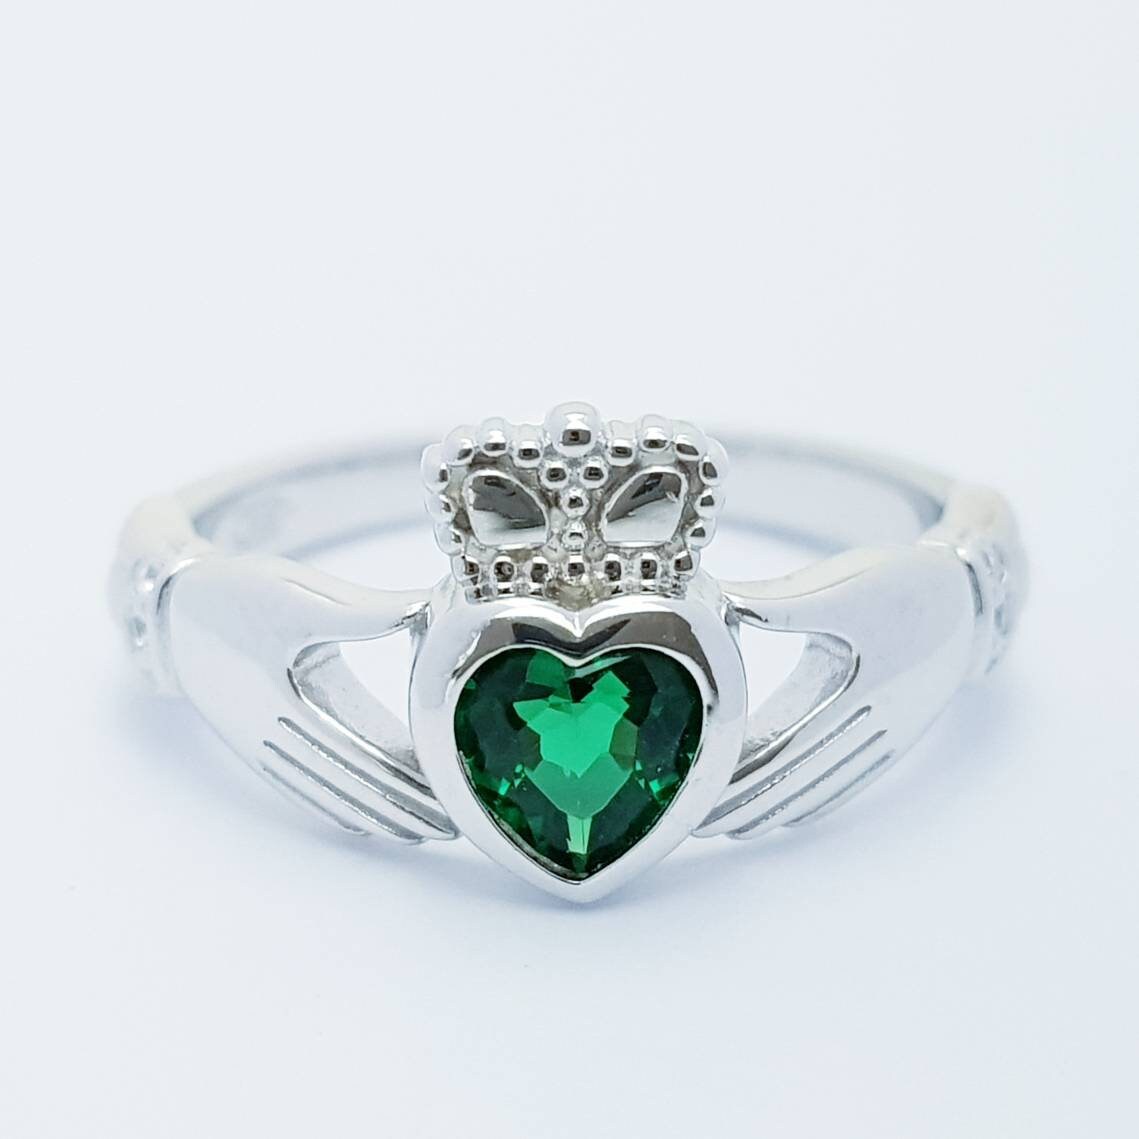 Sterling Silver Claddagh ring set with emerald green heart shaped stone, may birthstone claddagh ring from Ireland